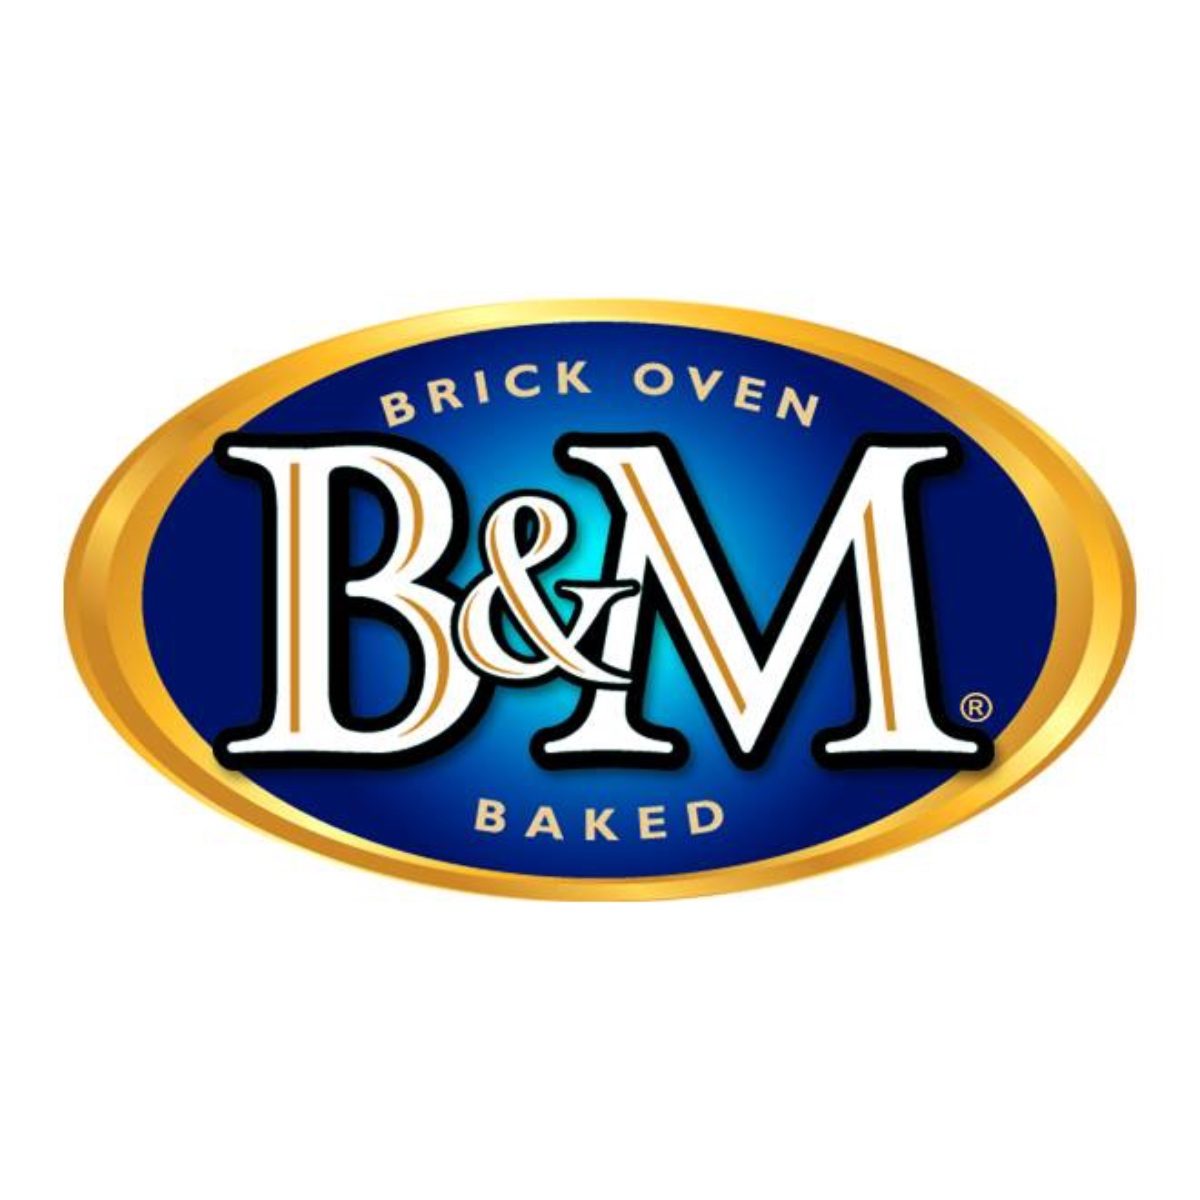 <p><strong><a class="SWhtmlLink" href="https://bmbeans.com" rel="noopener">B&M Beans</a>, Casco Bay</strong></p> <p>Brick-oven baked beans are something of a New England specialty, and B&M Beans perfected the process back in 1913. The company is now owned by Pillsbury, but they still make their canned beans the traditional way in their Casco Bay factory.</p>